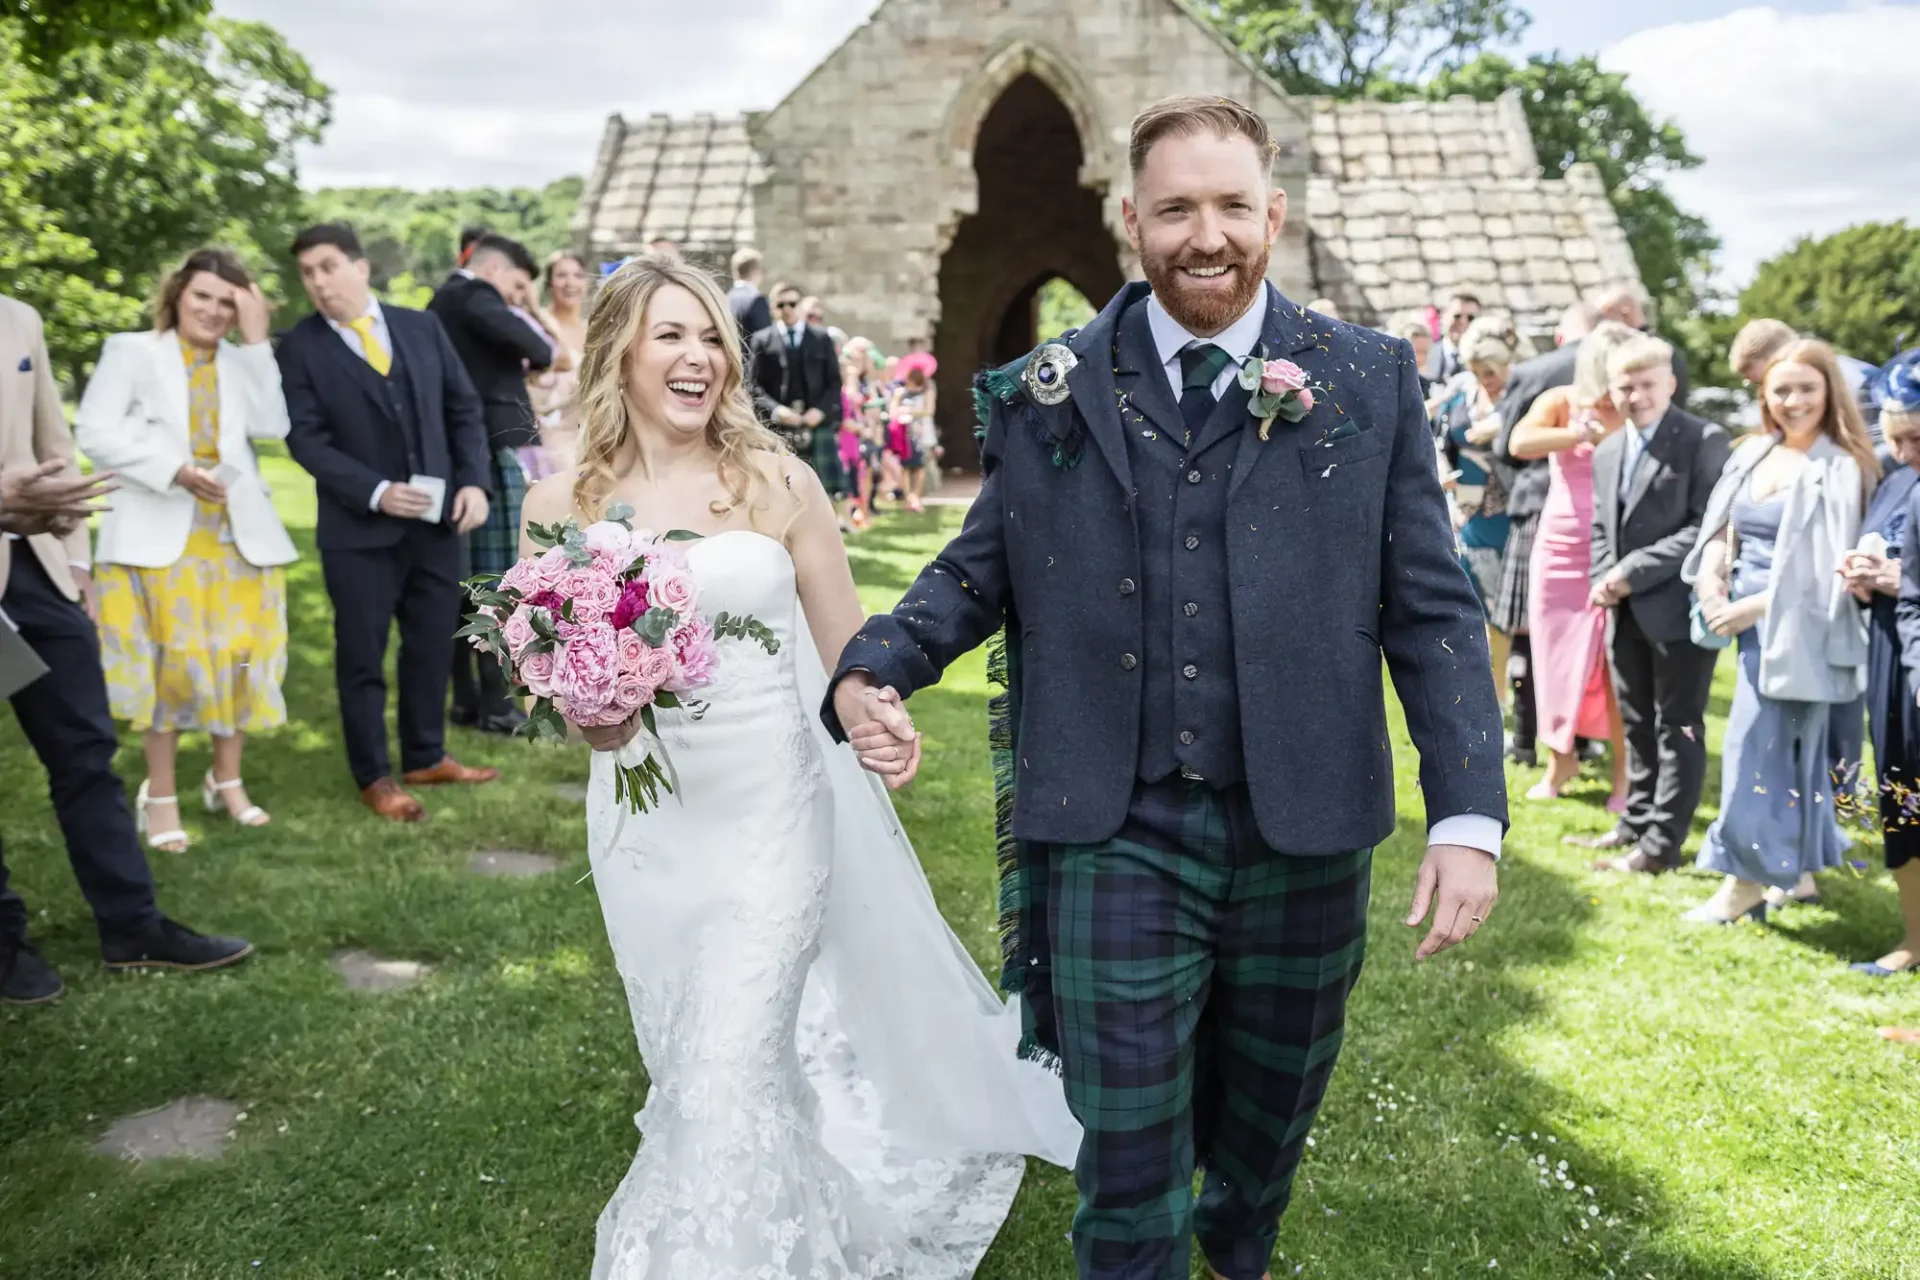 A bride and groom smiling and holding hands as they walk through guests after their wedding ceremony, the groom in a kilt and the bride in a white dress.